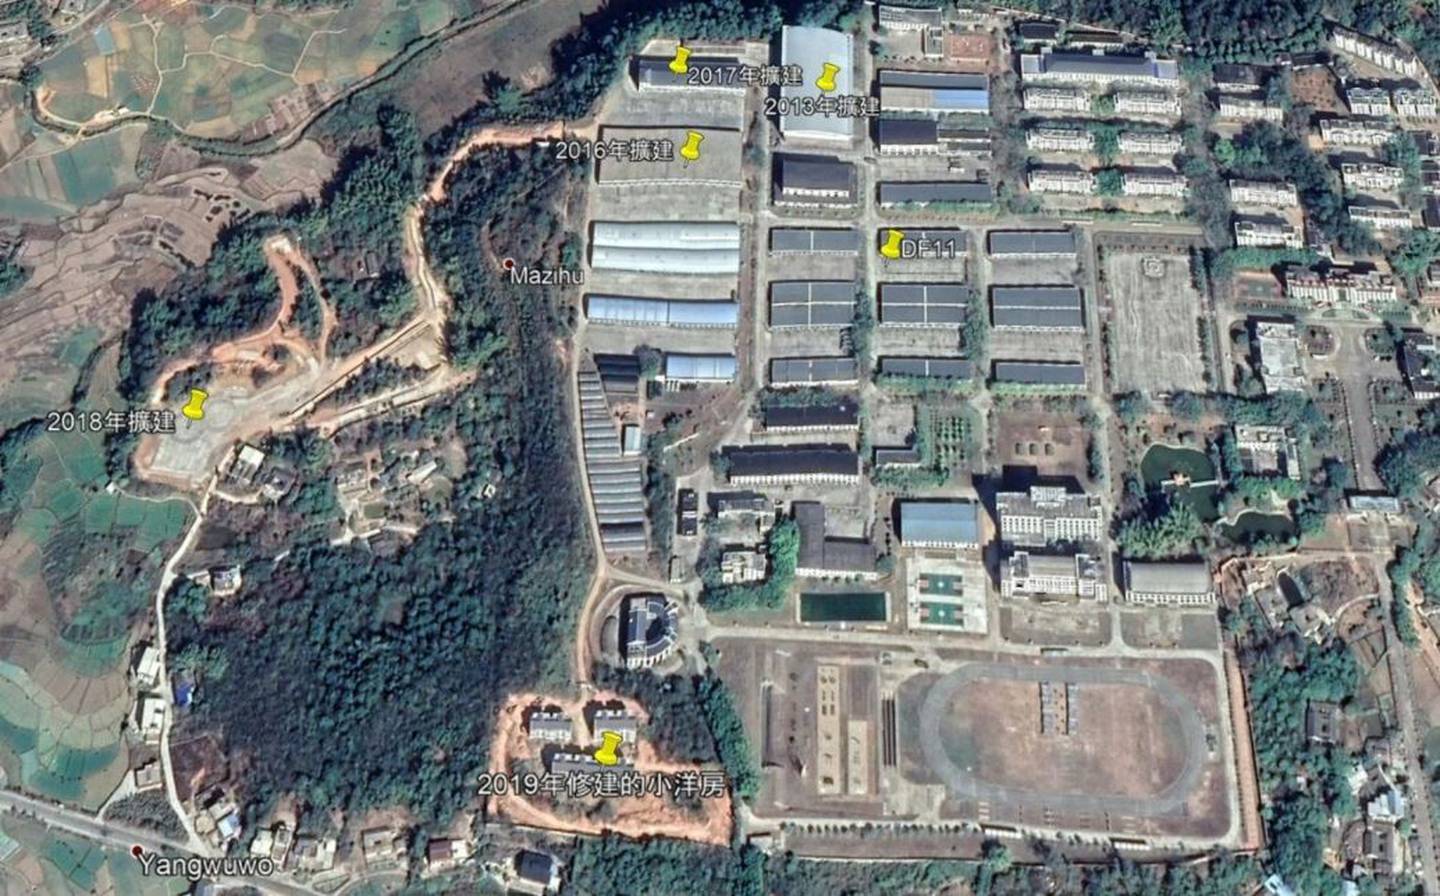 A satellite image shows how a base in Puning in Guangdong has expanded in recent years. Photo / Kanwa Defence Review